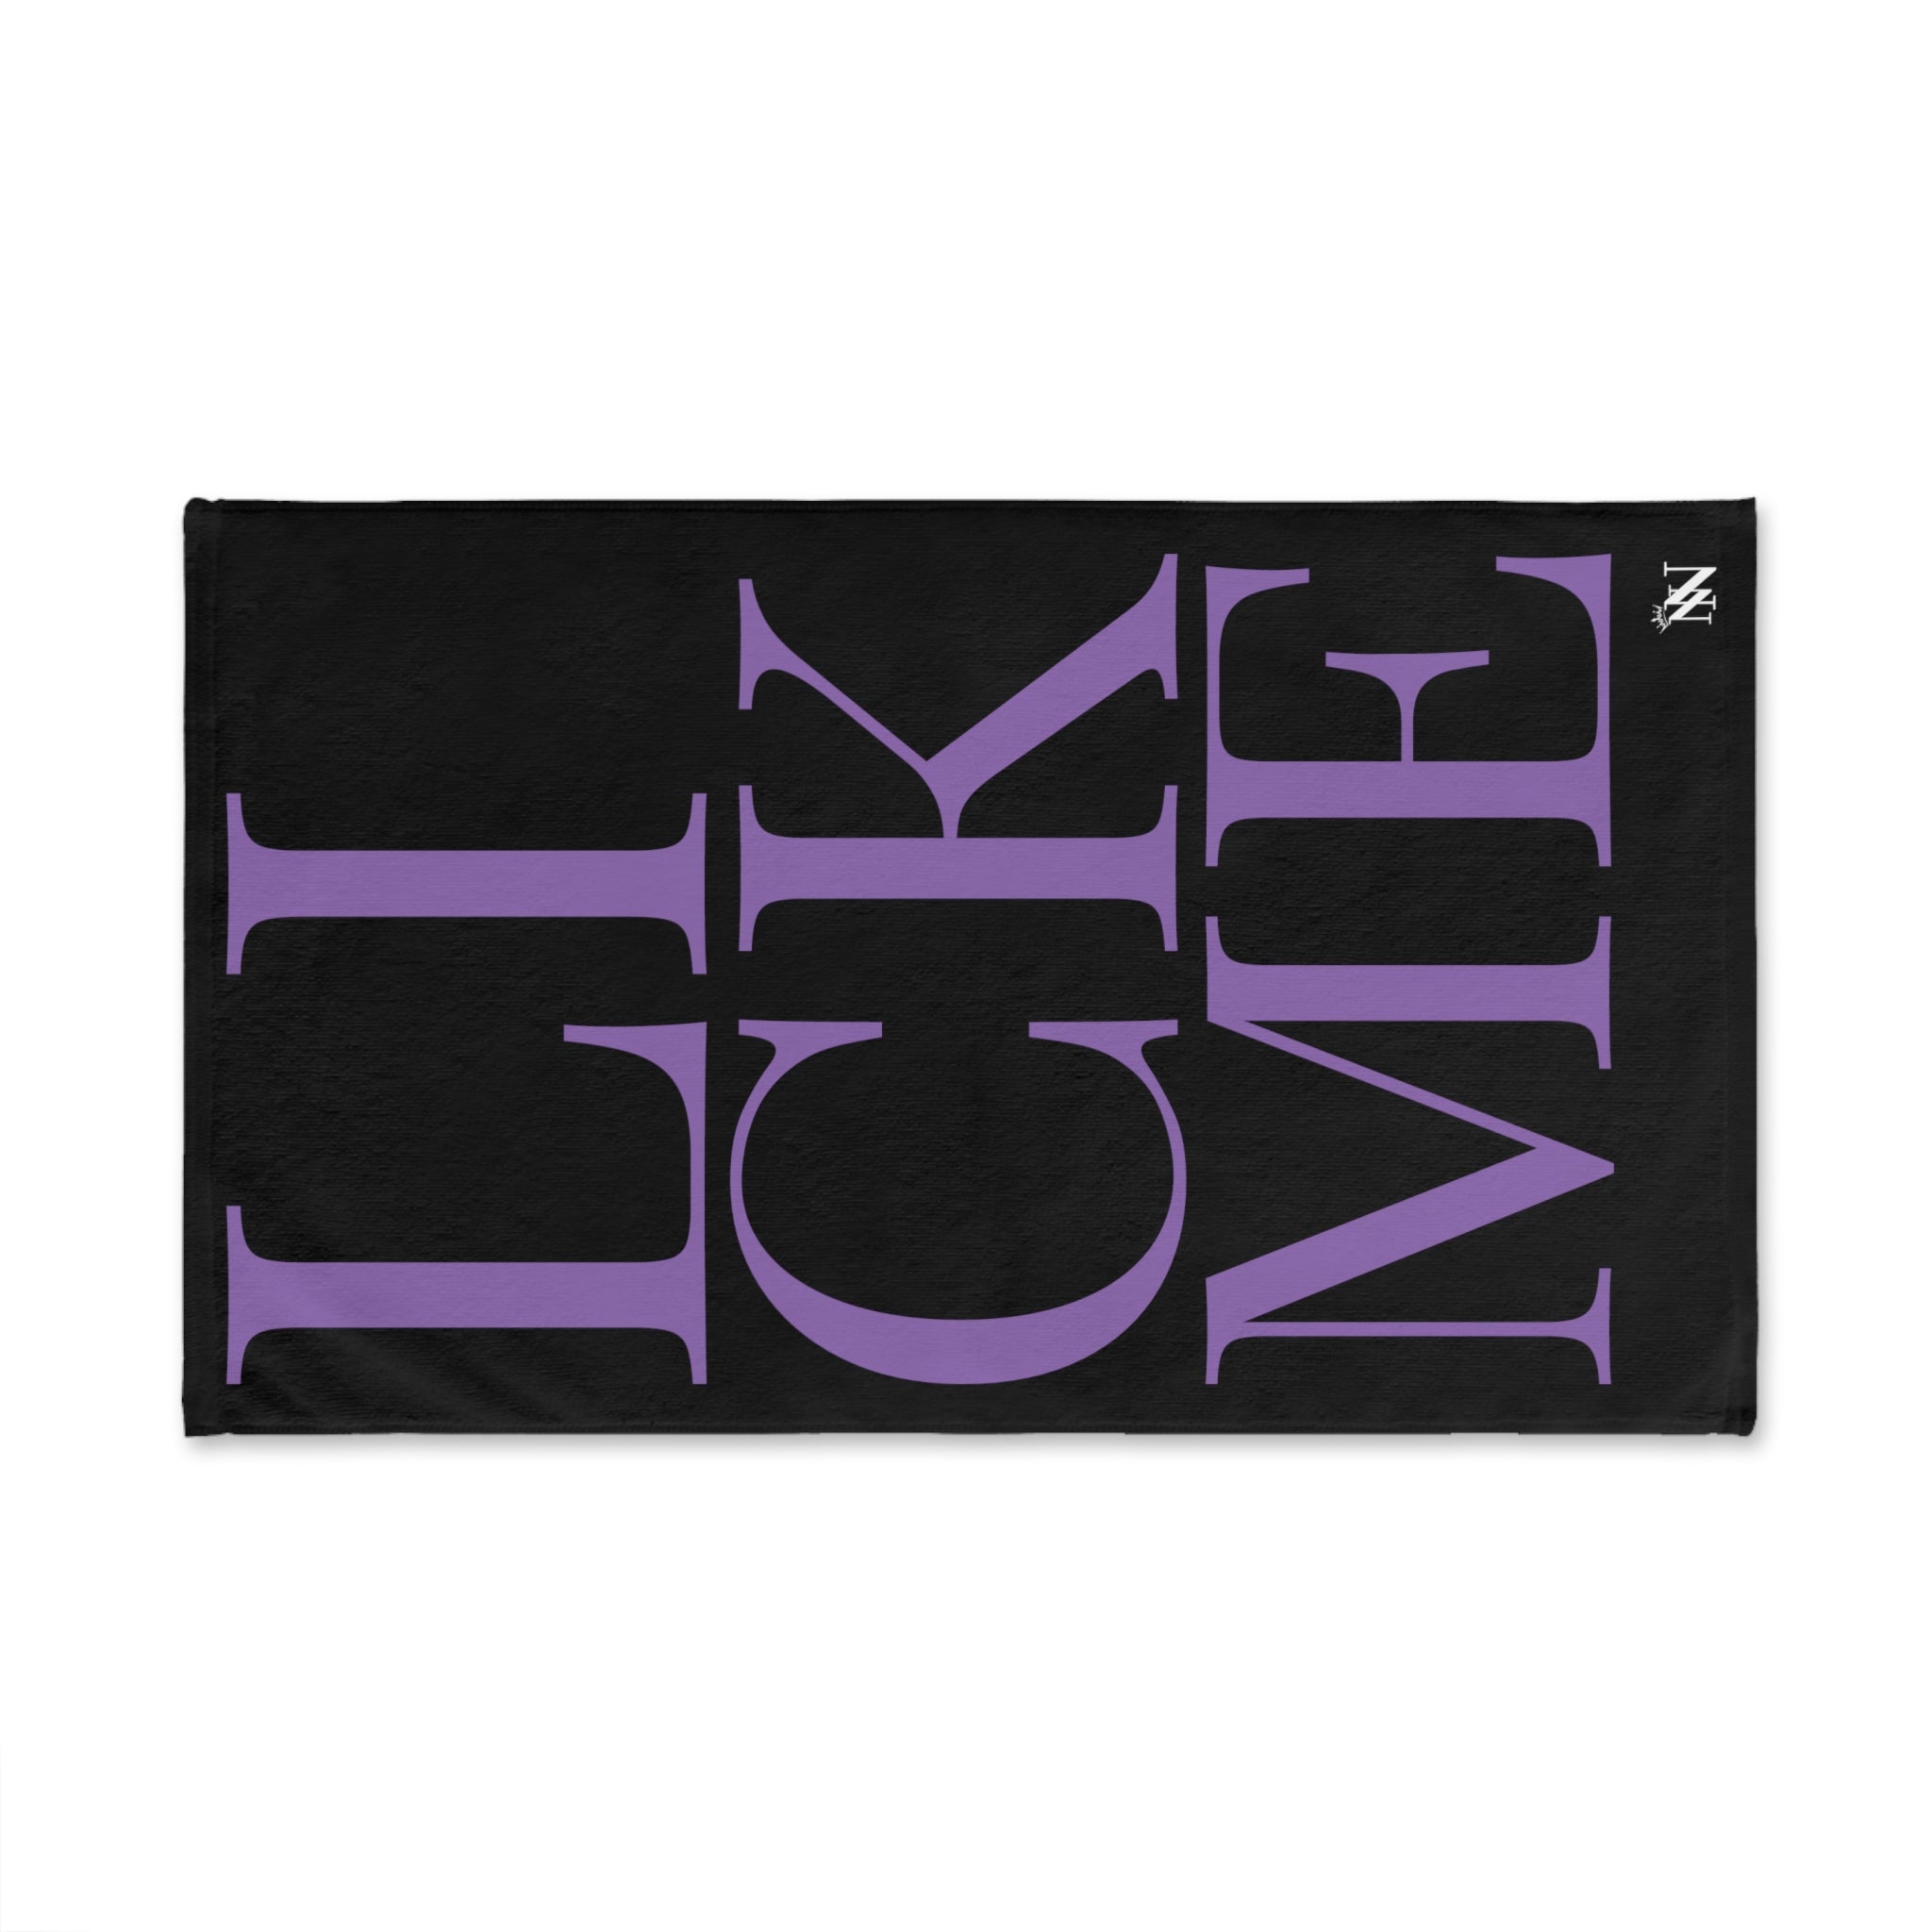 Lick Me Lavendar Black | Sexy Gifts for Boyfriend, Funny Towel Romantic Gift for Wedding Couple Fiance First Year 2nd Anniversary Valentines, Party Gag Gifts, Joke Humor Cloth for Husband Men BF NECTAR NAPKINS